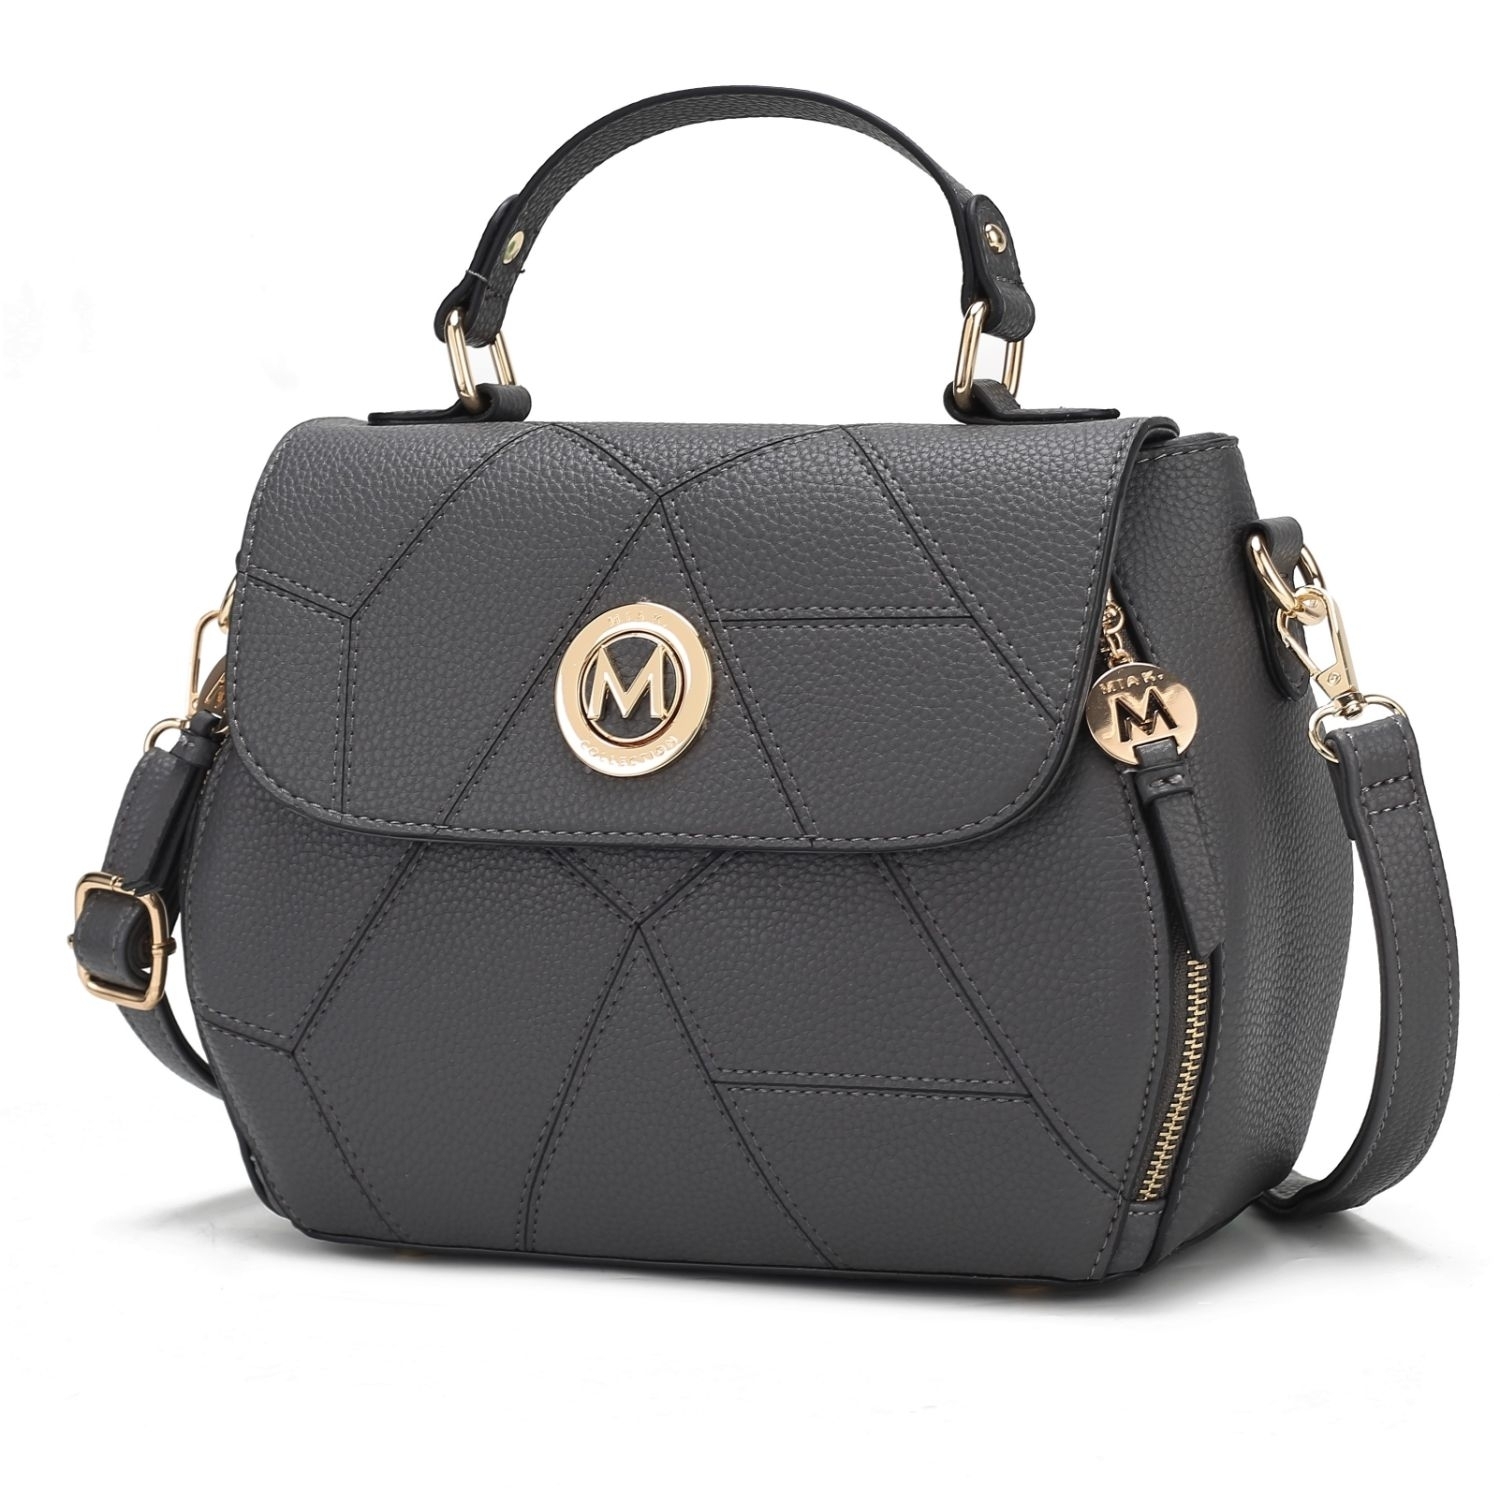 MKF Collection Clementine Vegan Leather Women's Satchel Bag By Mia K - Charcoal